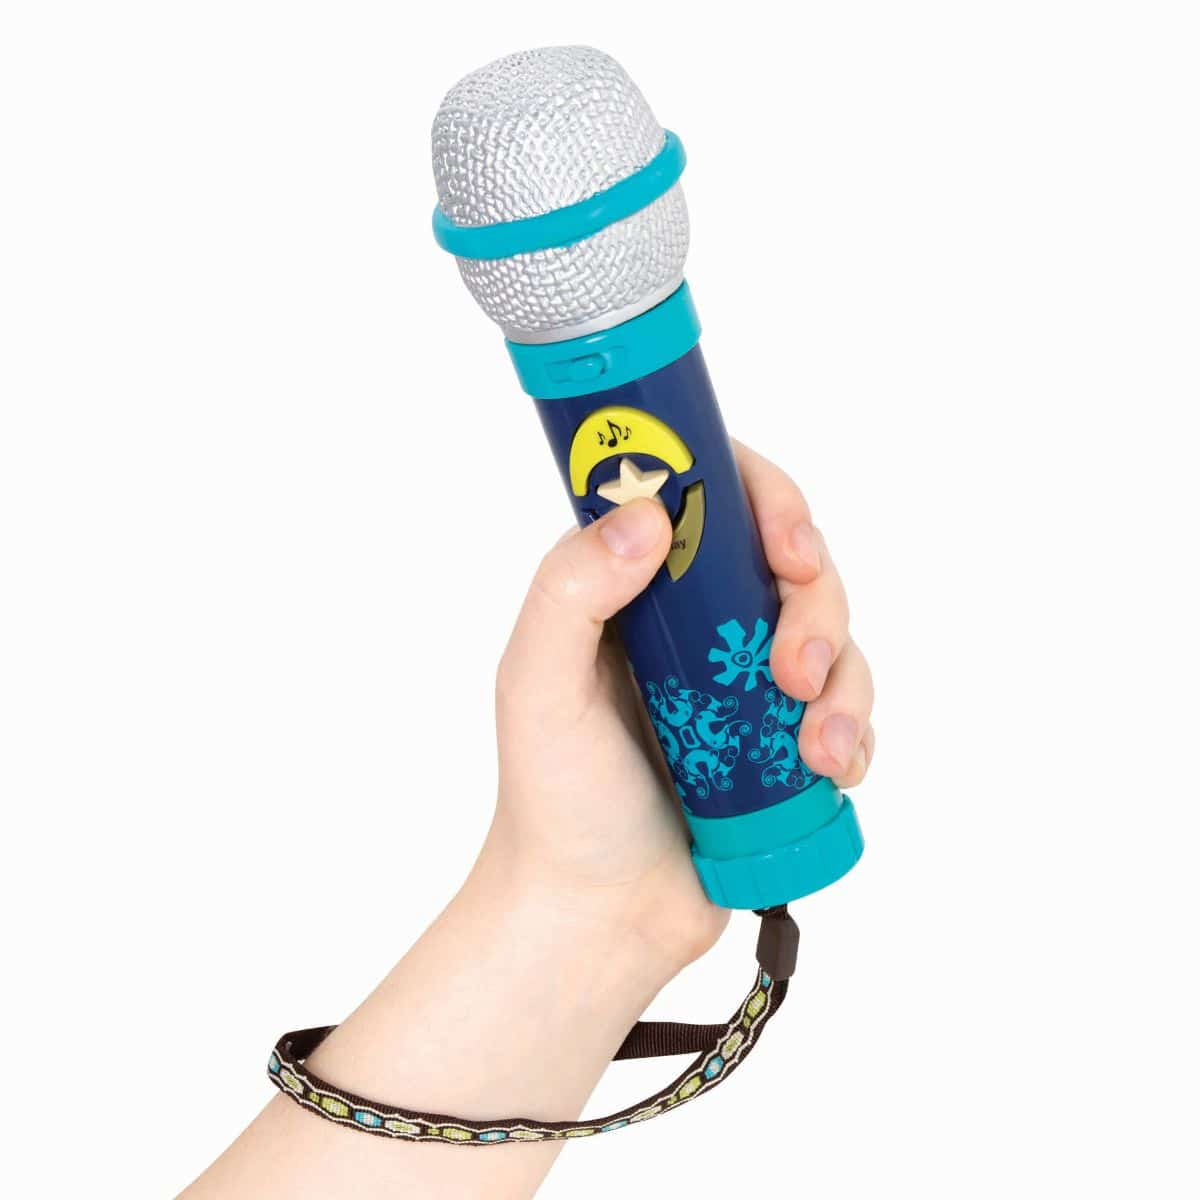 B.Toys Okideoke Microphone with recording function, amplify voice